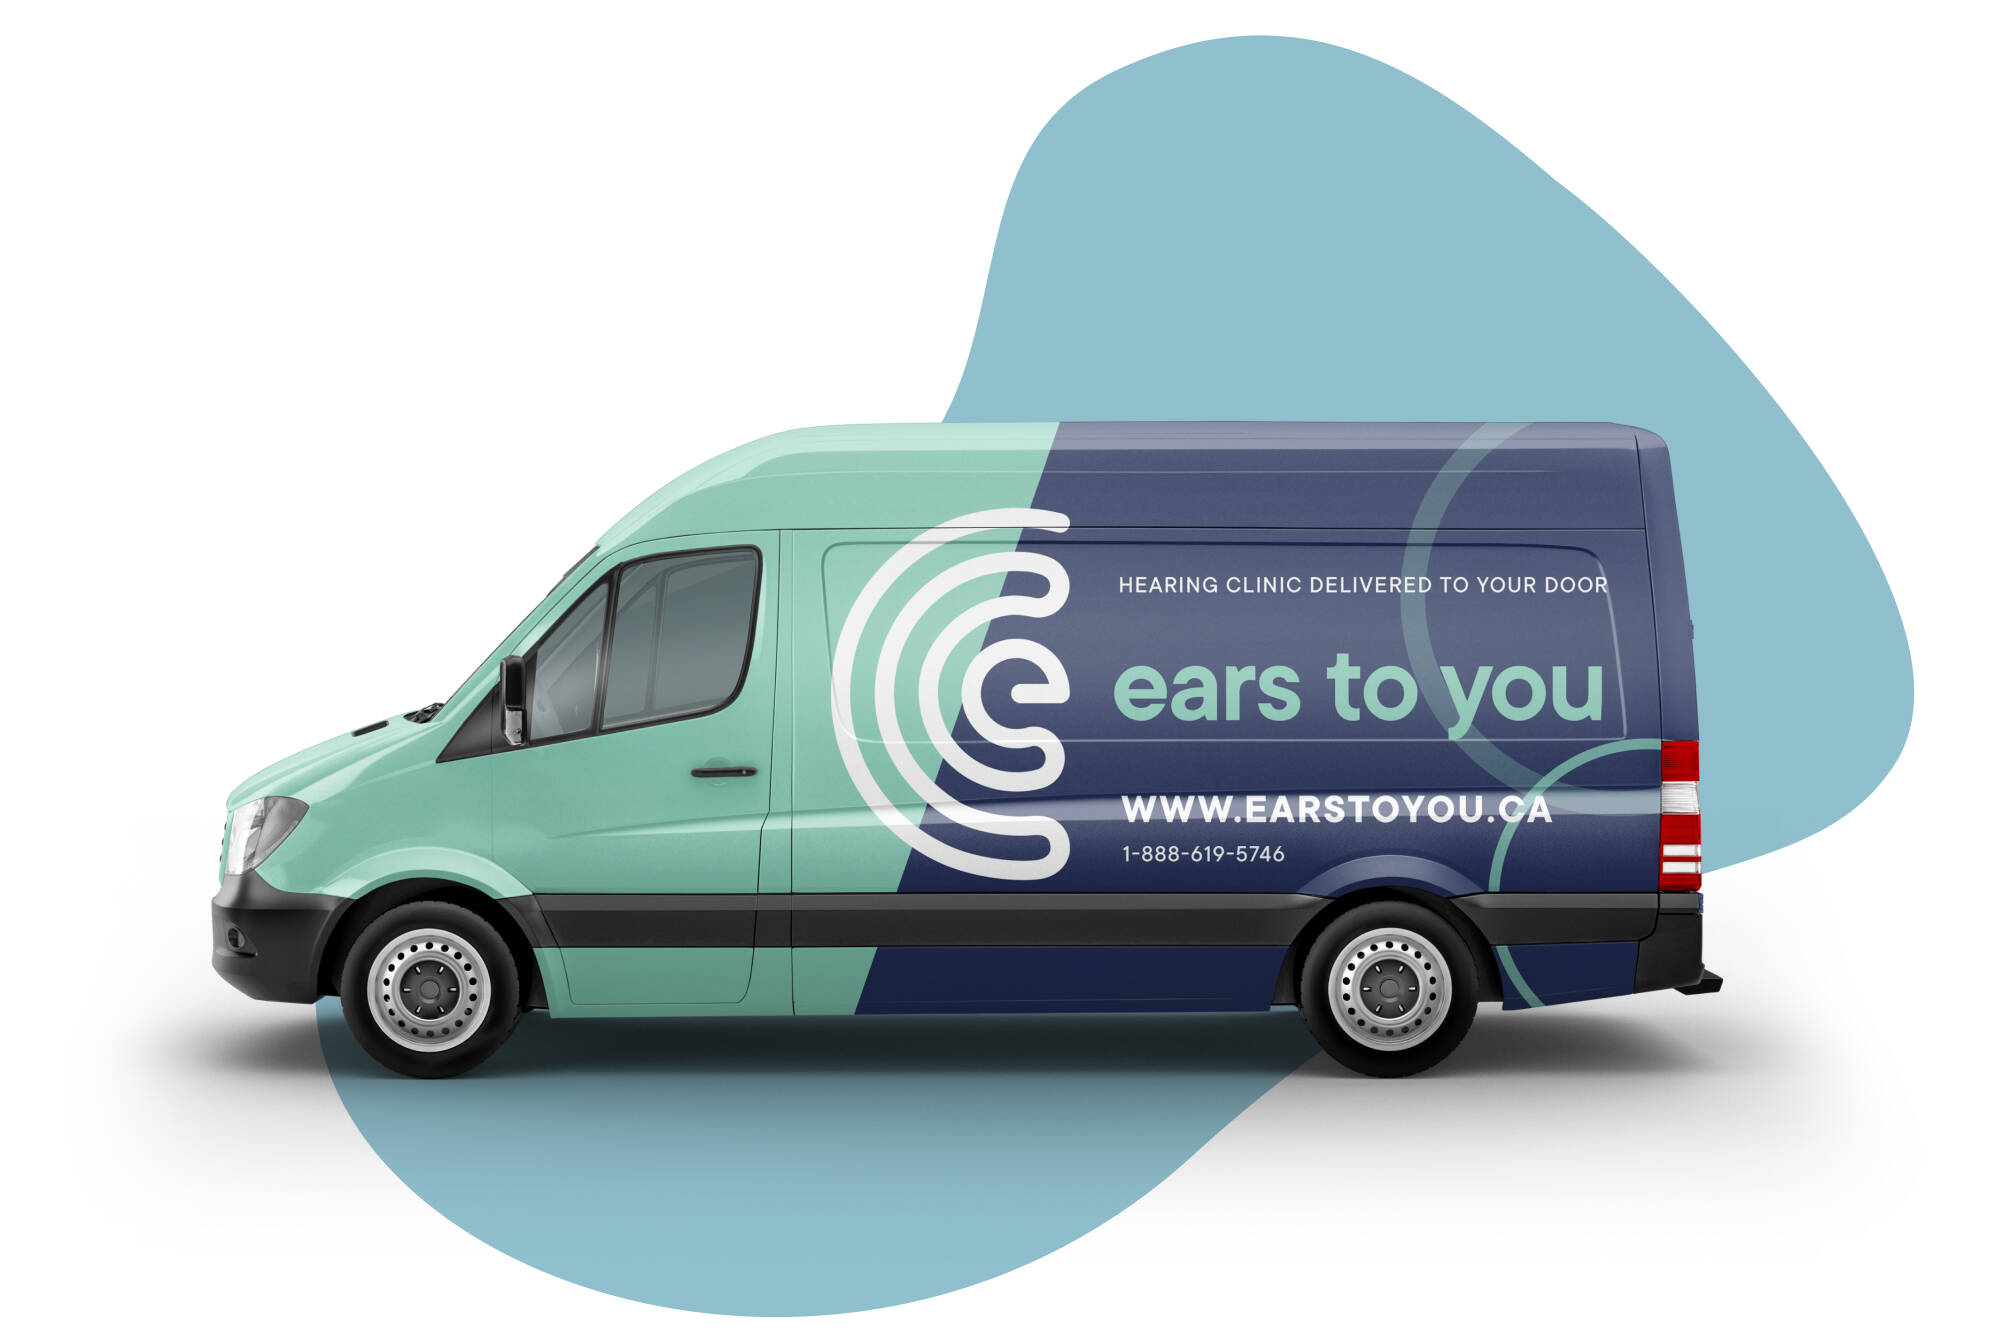 Ears to You Mobile Hearing Clinic serves Duncan, Ladysmith, Nanaimo, Parksville, Qualicum, Courtenay and Campbell River and all the surrounding communities on Vancouver Island!